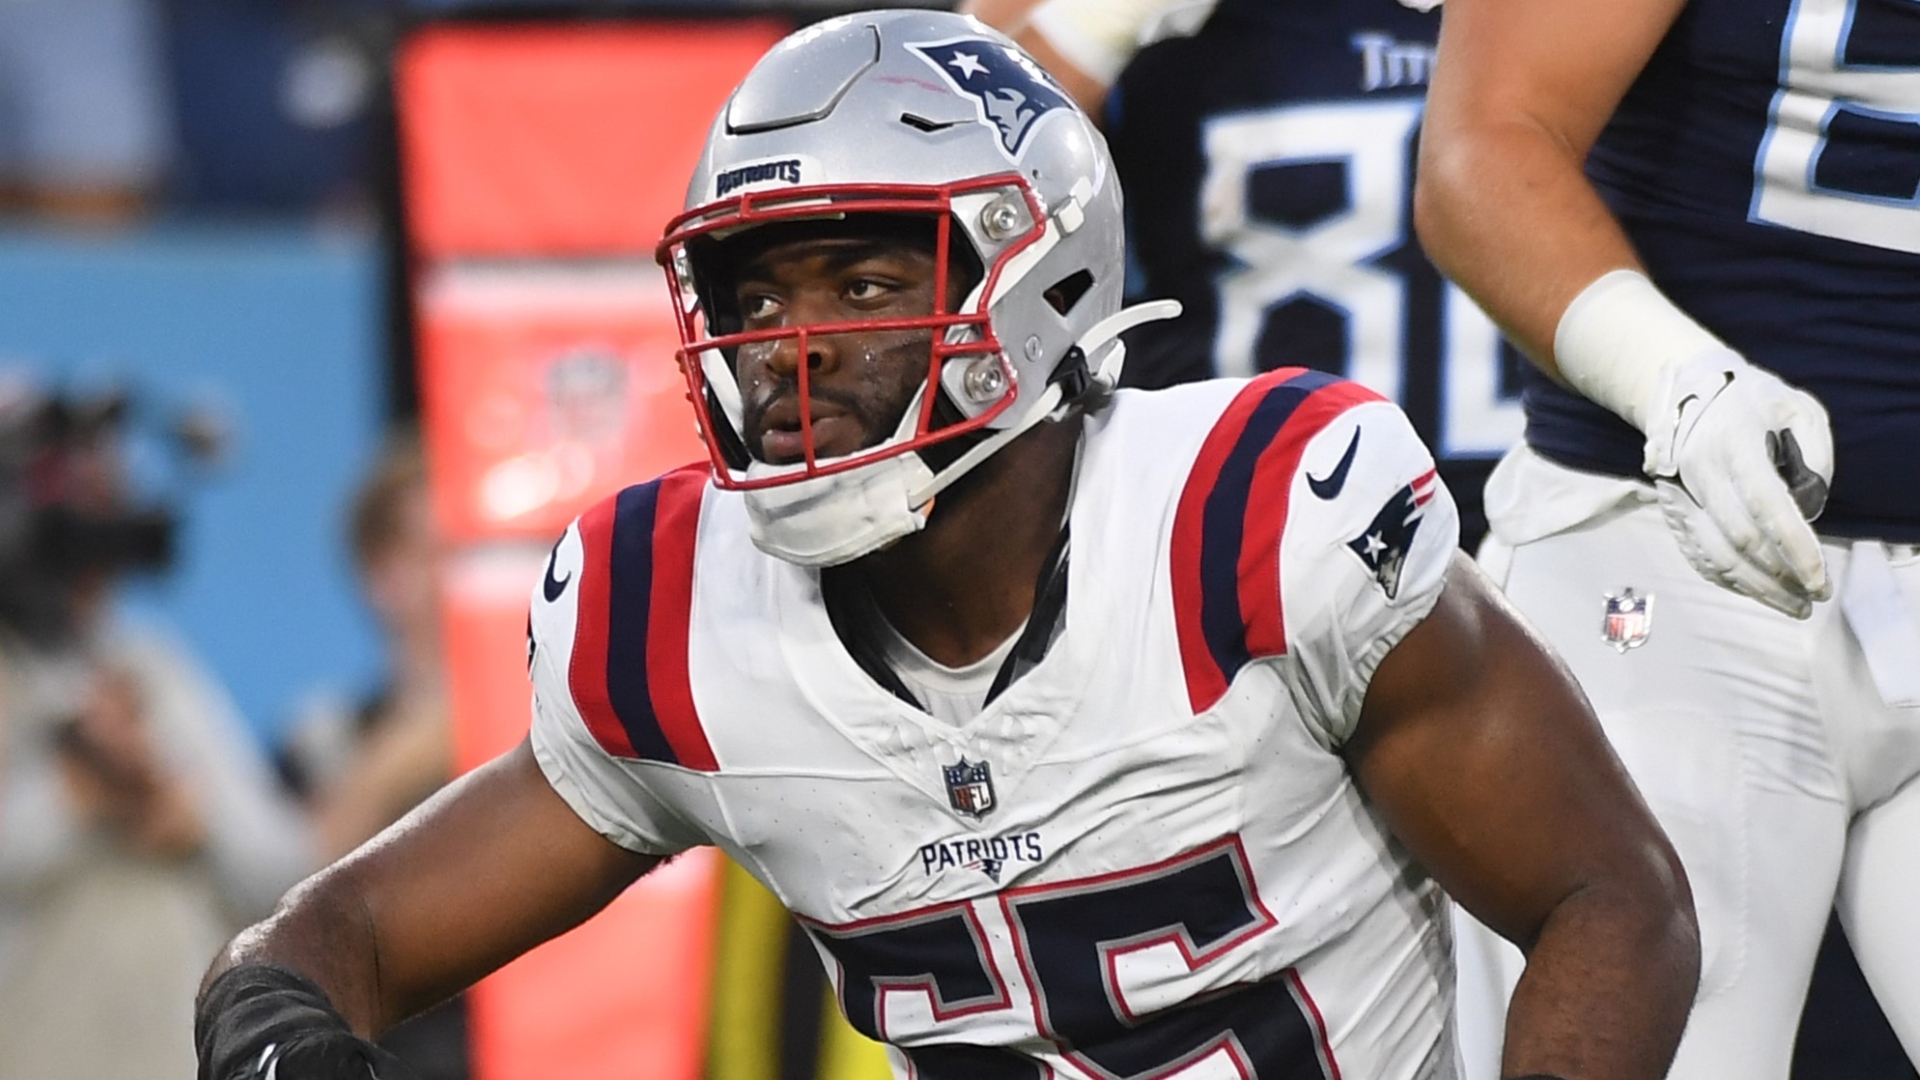 What Josh Uche Reportedly Turned Down In Free Agency For Patriots
Return